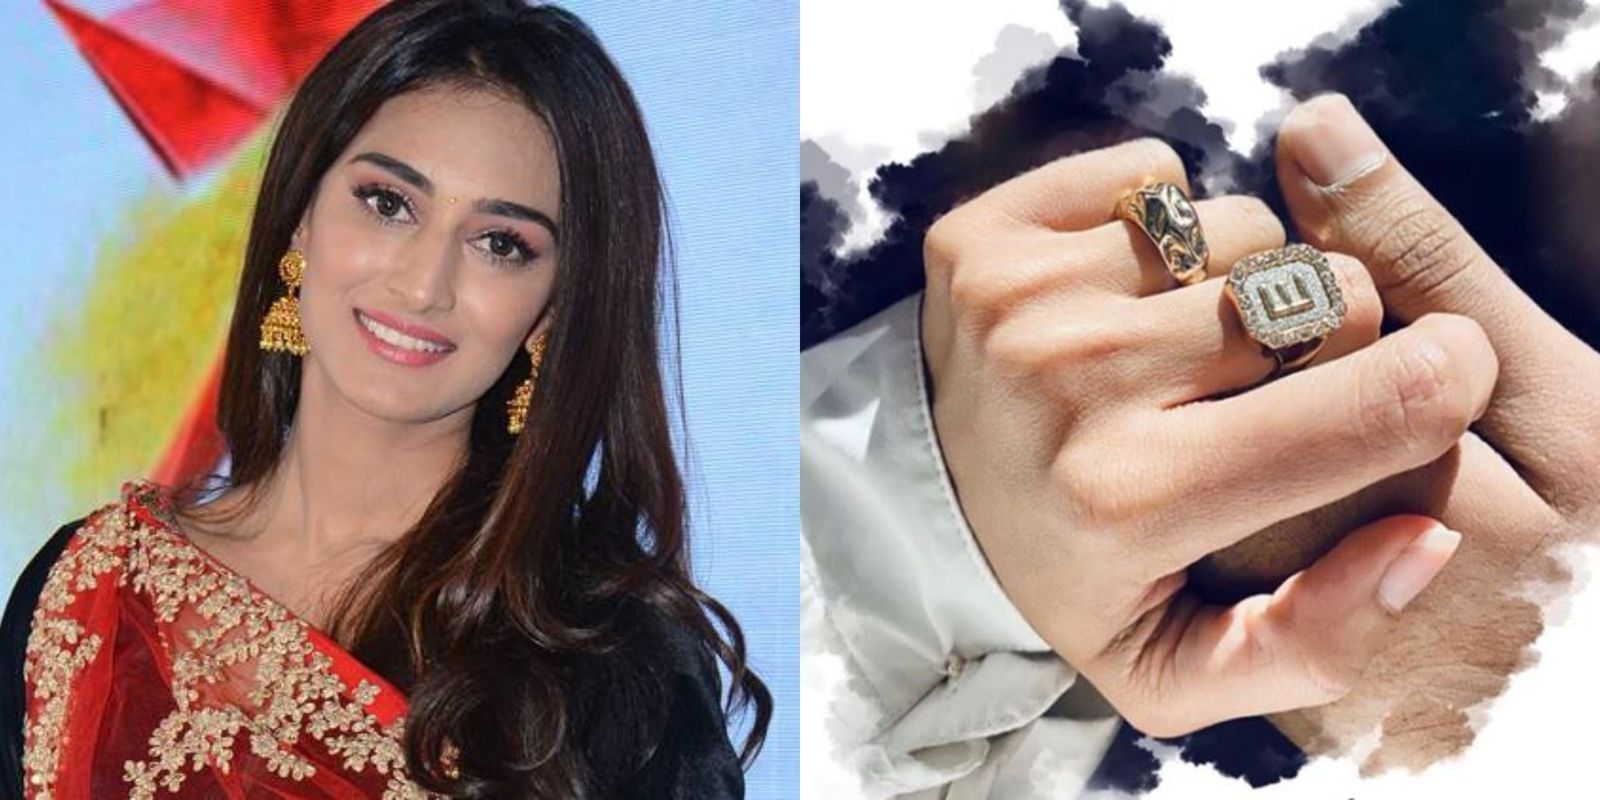 Kasautii Zindagii Kay Fame Erica Fernandes Clears The Air On Engagement Rumors